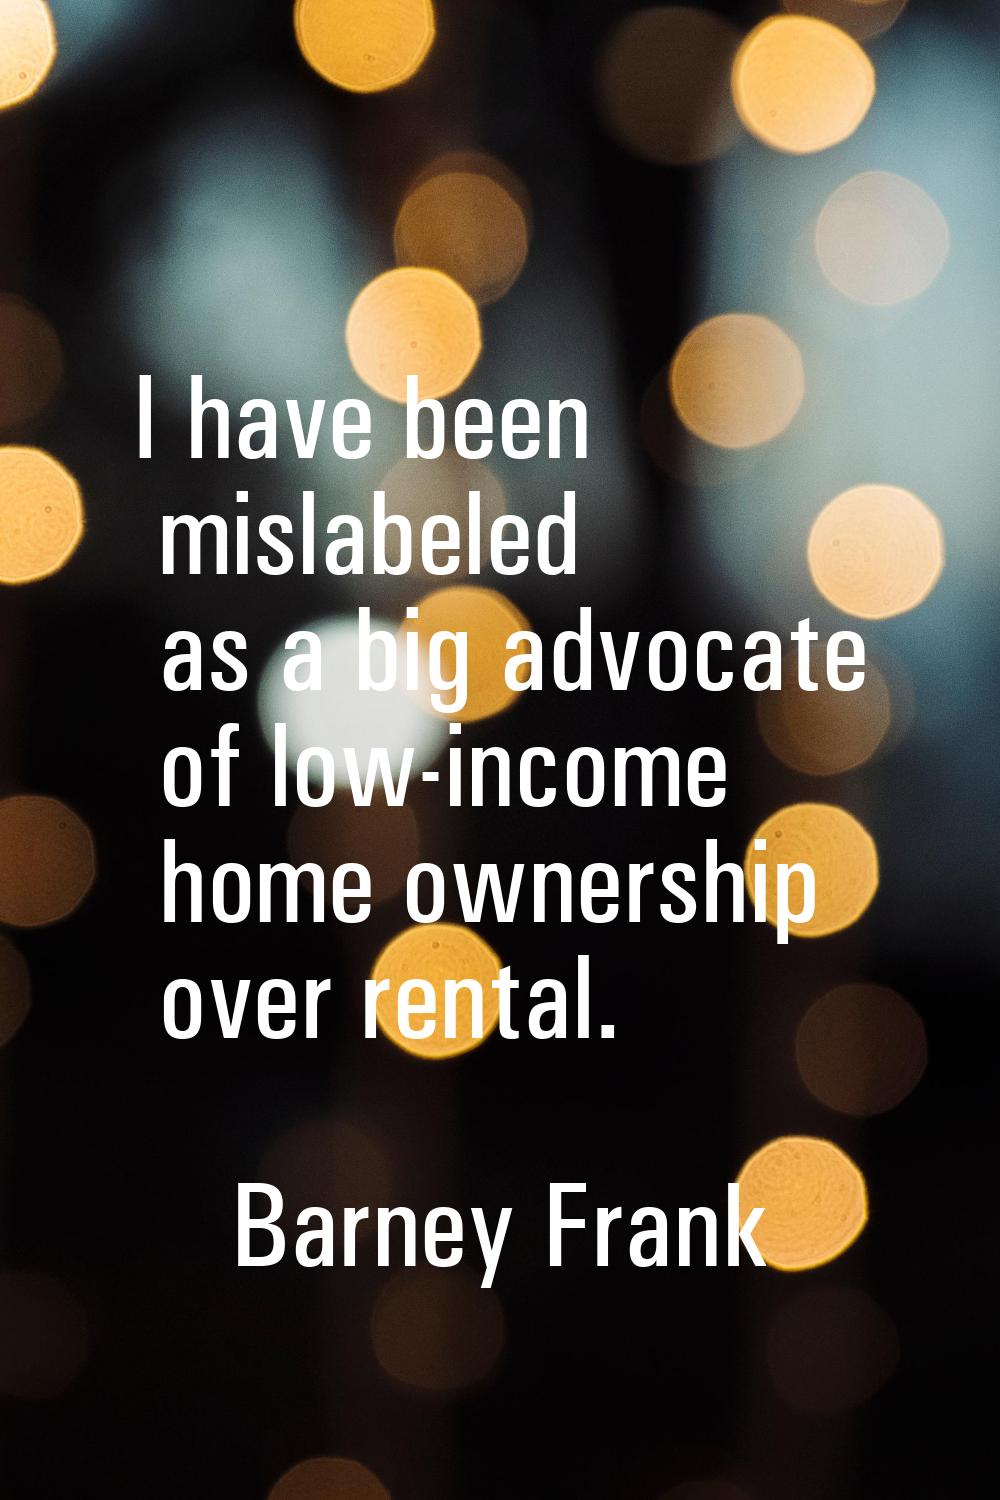 I have been mislabeled as a big advocate of low-income home ownership over rental.